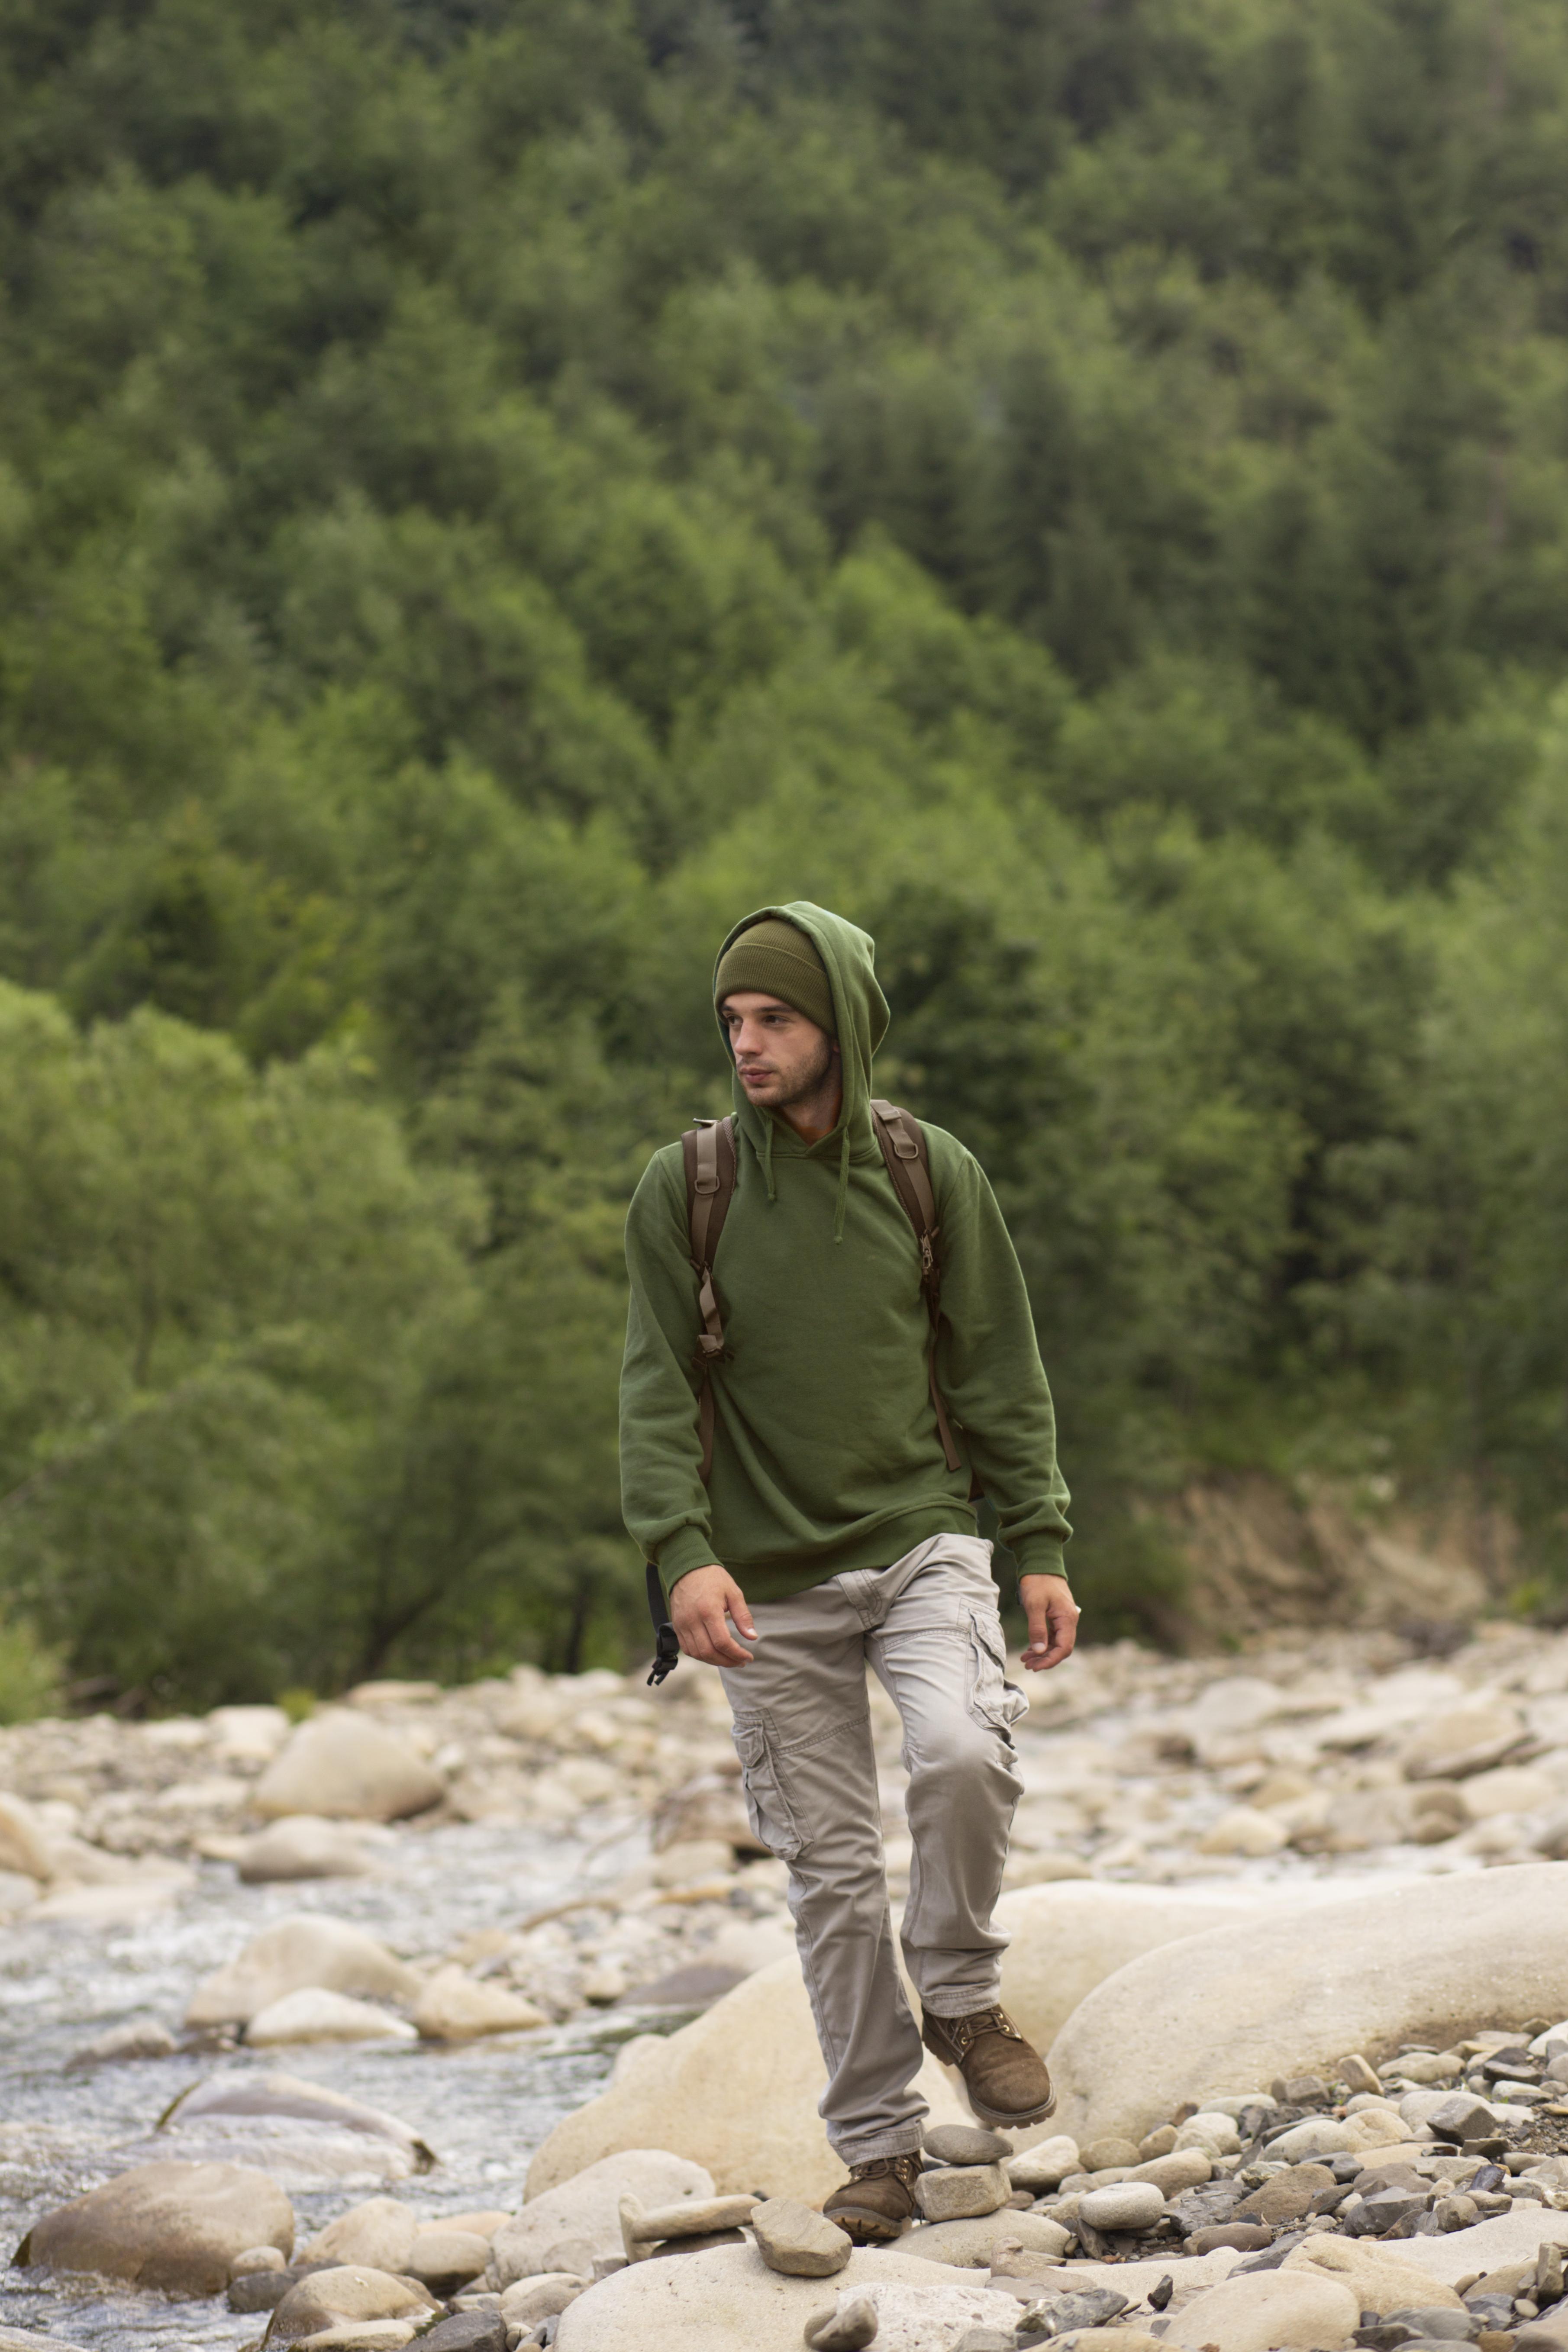 8 Stylish and Comfortable Trekking Outfits – A Comprehensive Guide